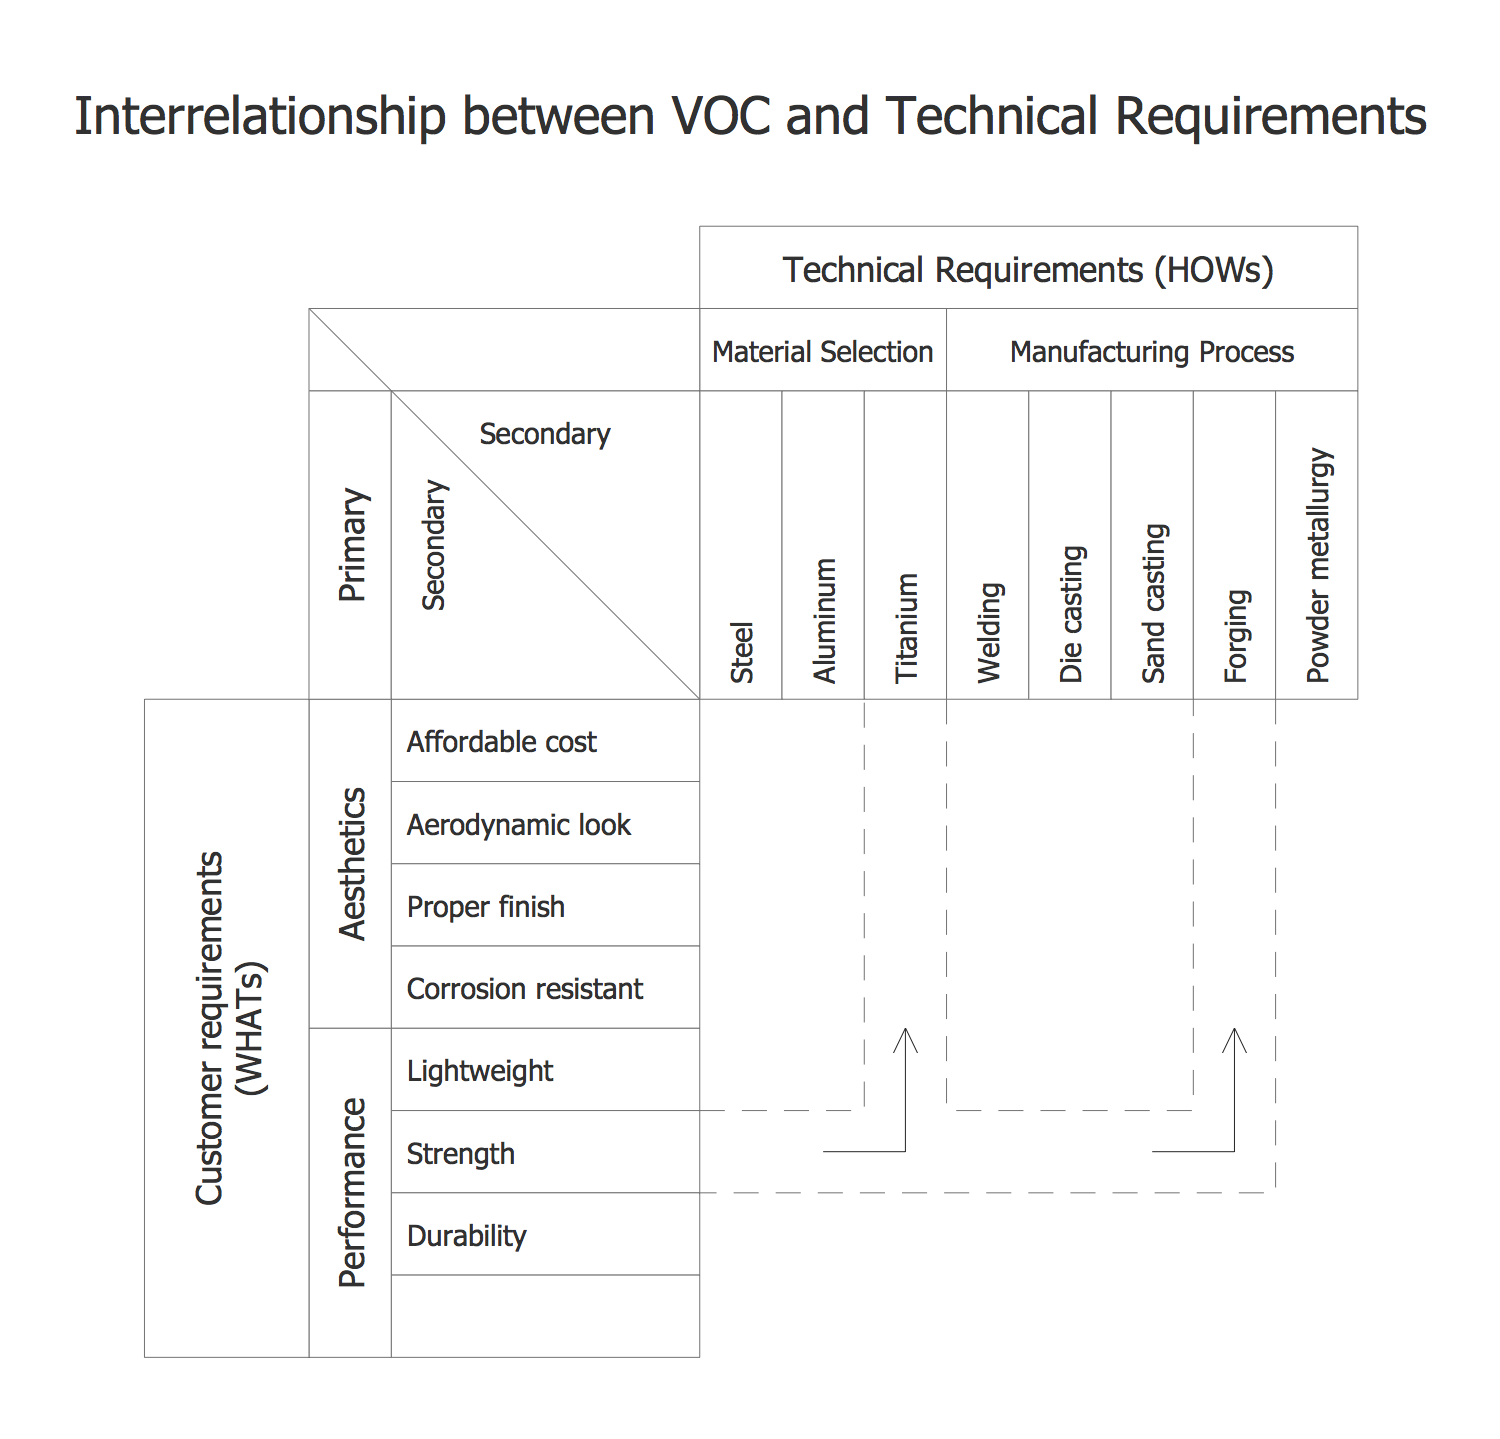 House of Quality VOC vs Technical Requirements